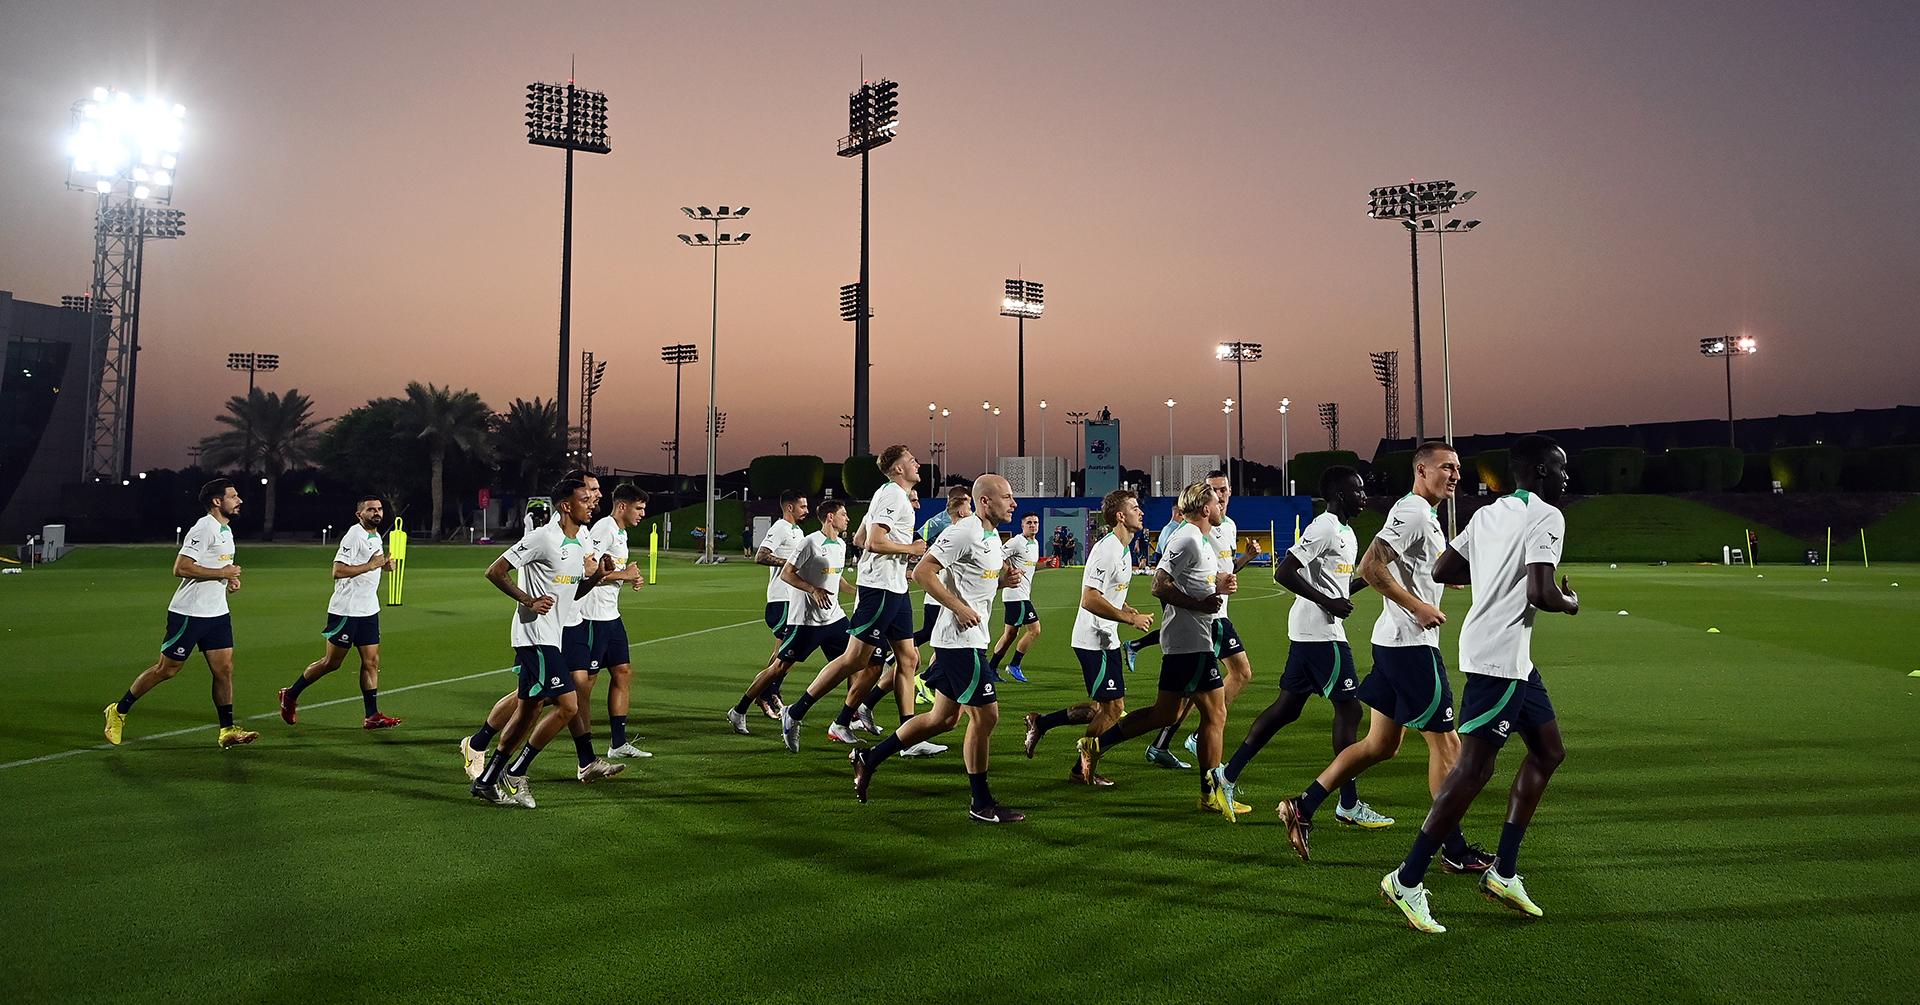 The Socceroos warm up at training in Qatar at the FIFA World Cup